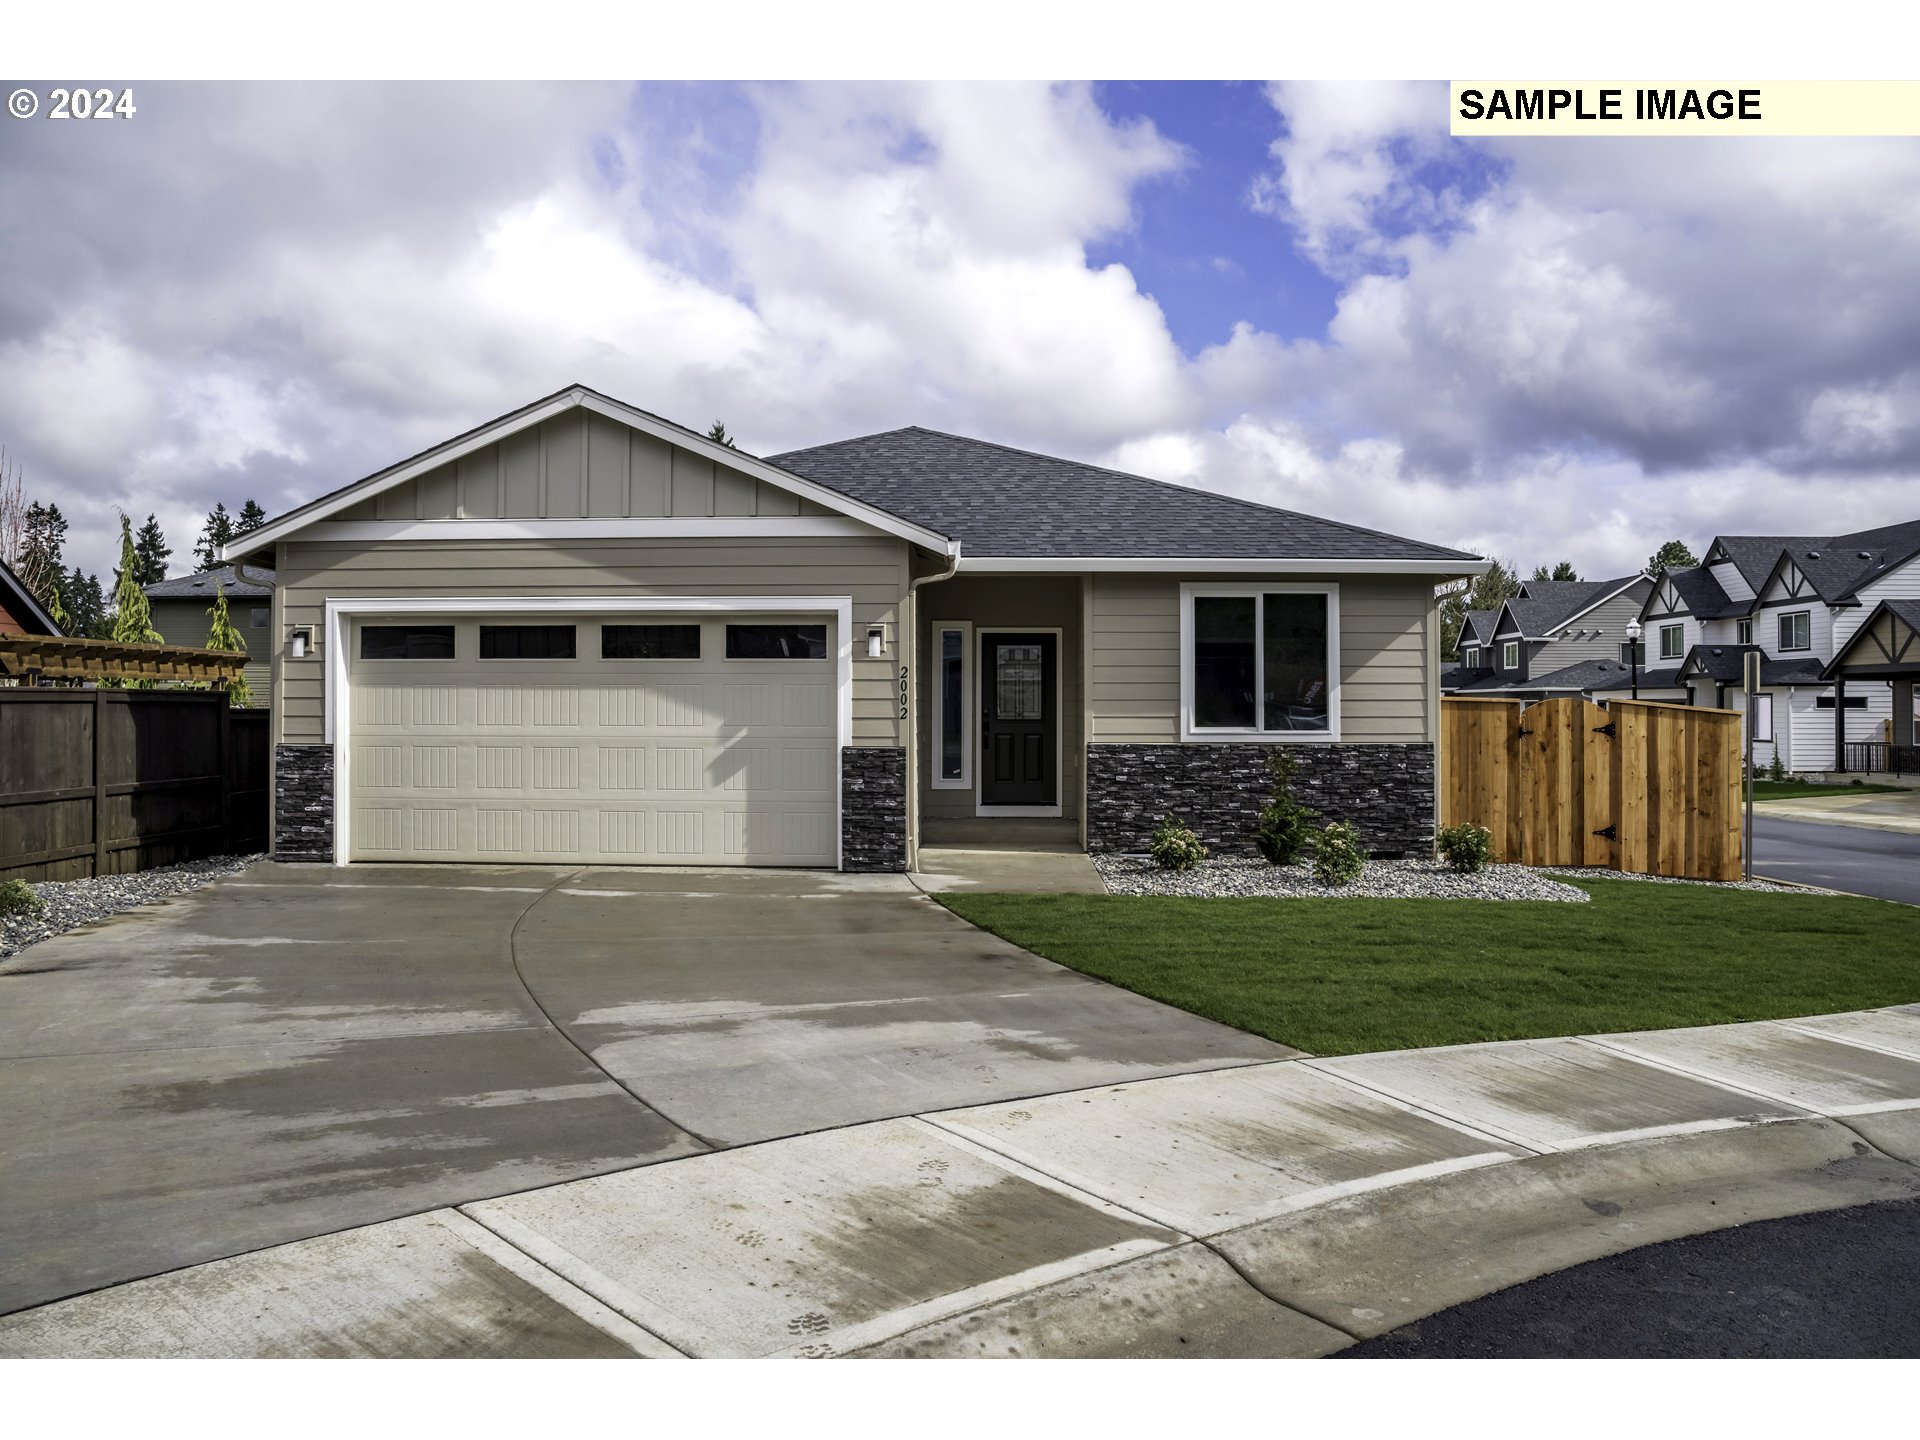 1103 NW 110th ST, Vancouver, WA 98685